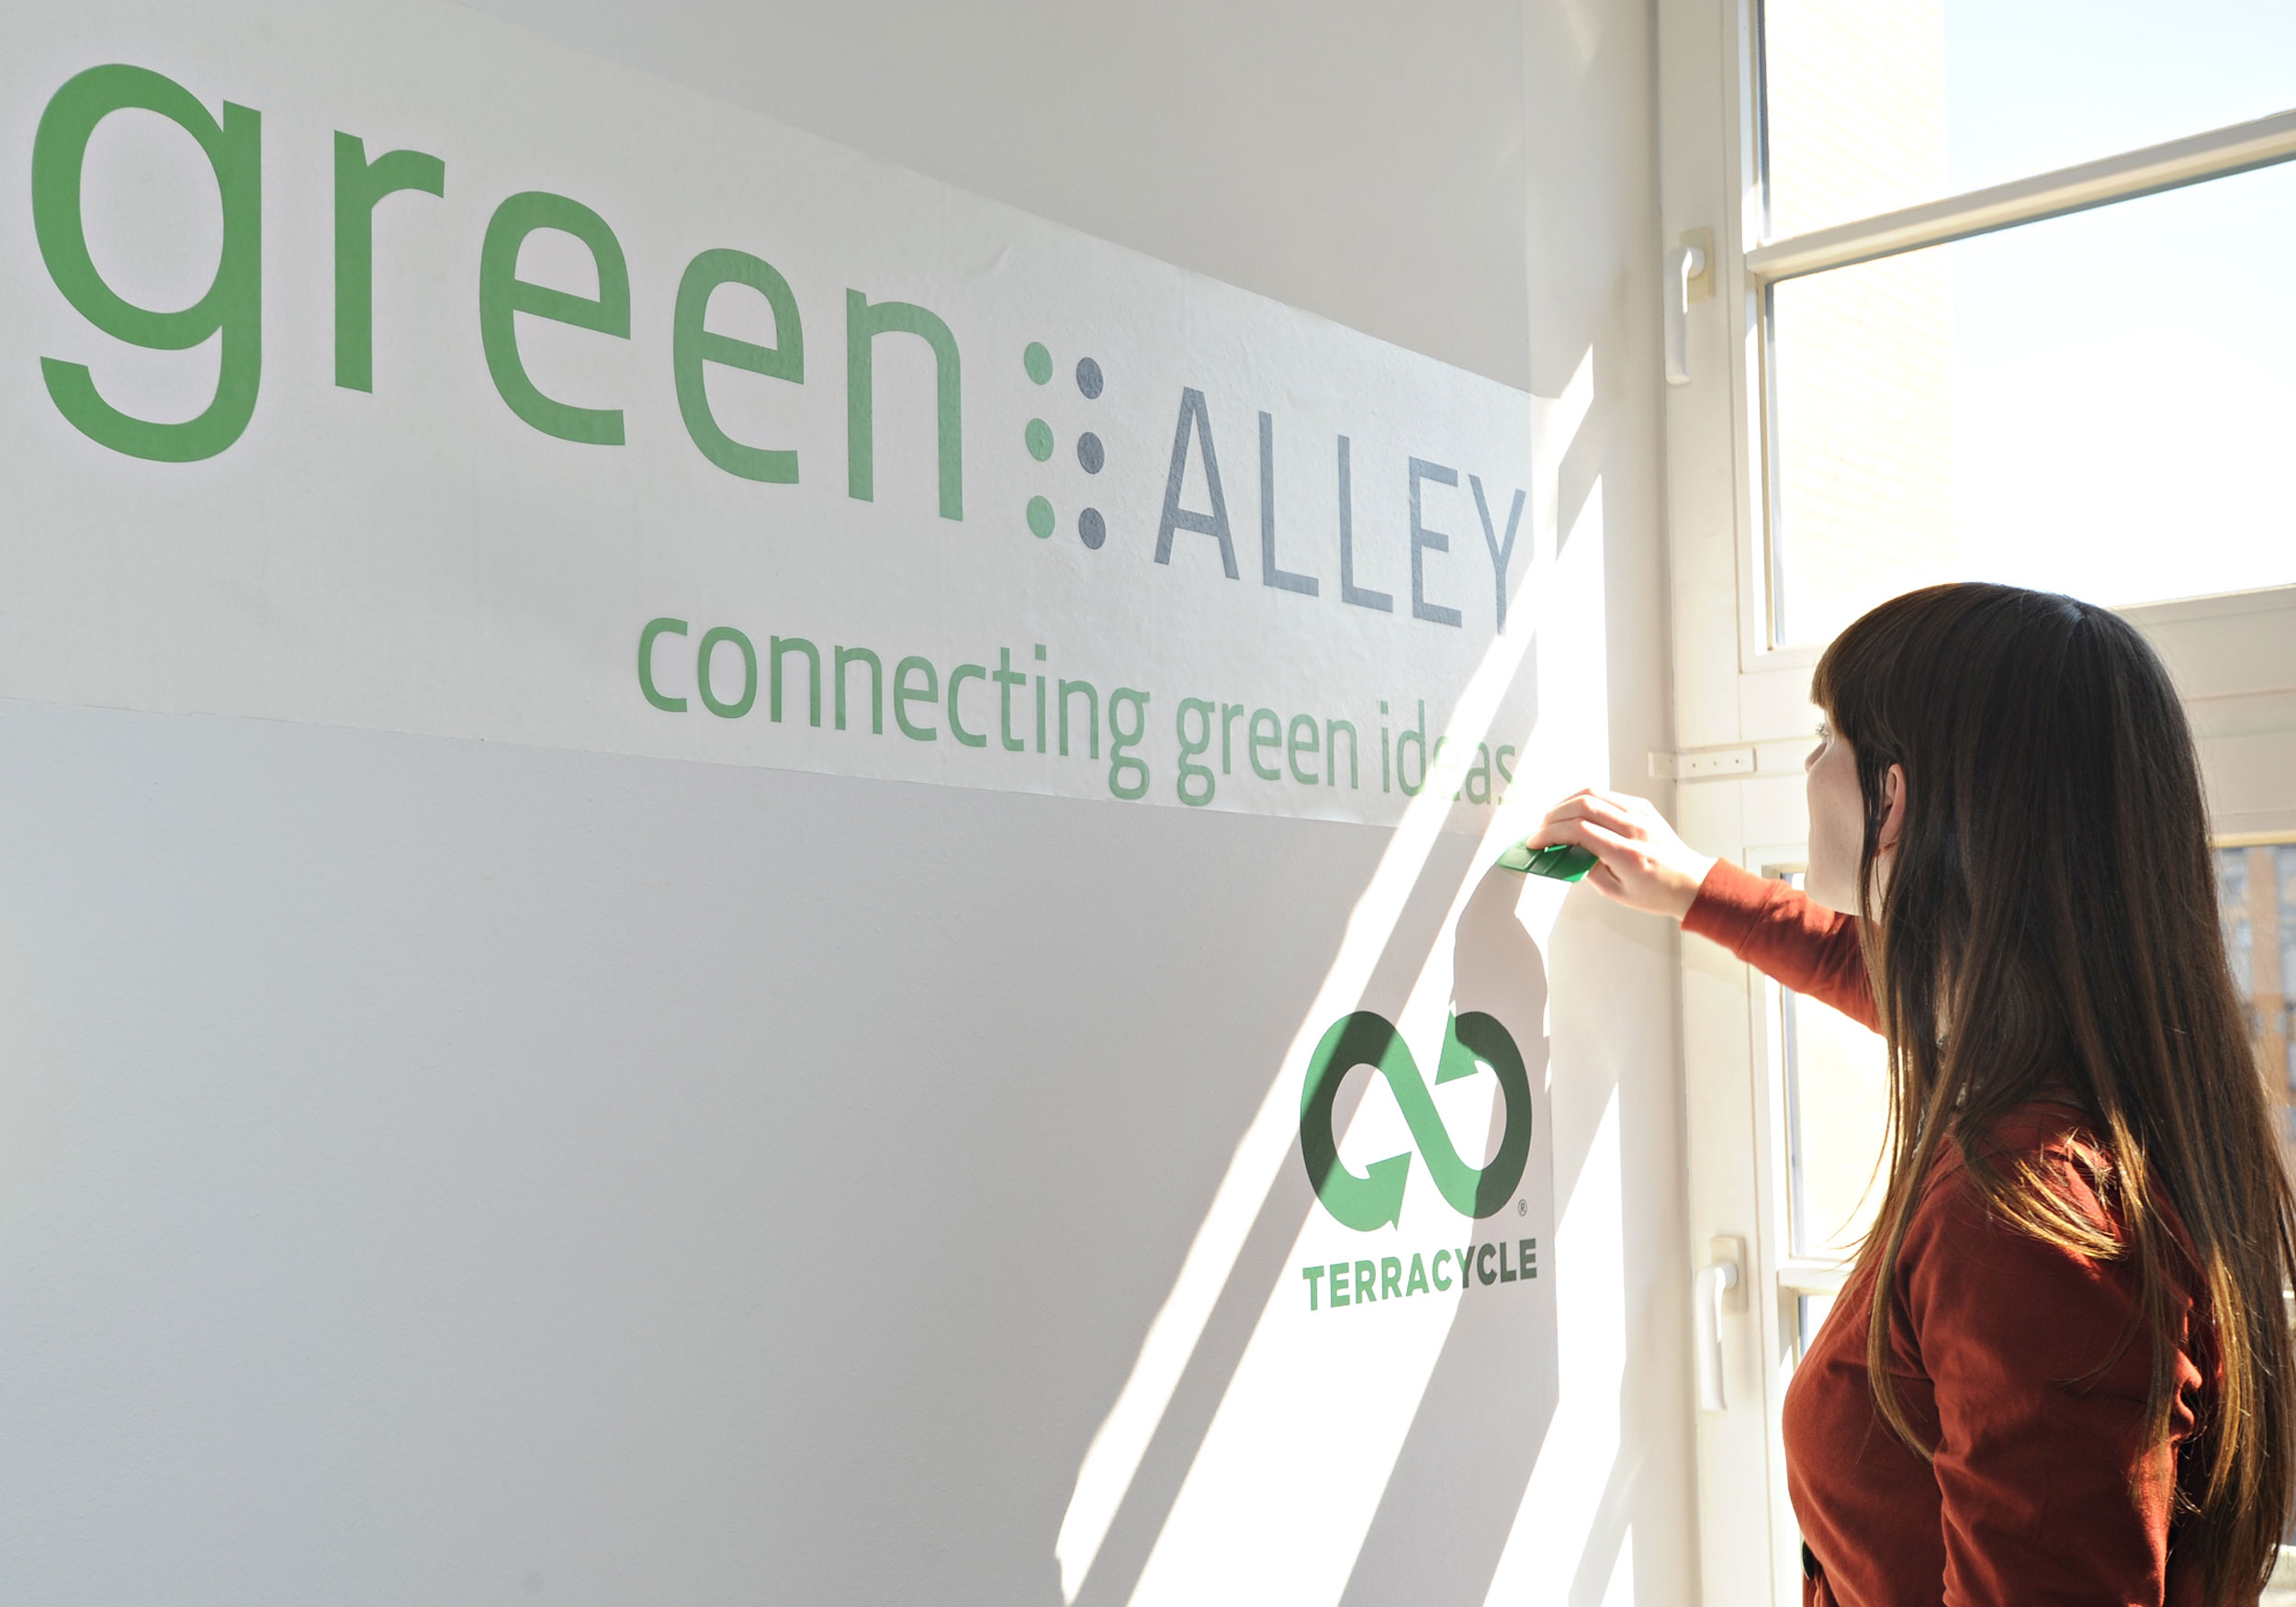 img-erp-blog-green-alley-connecting-green-ideas